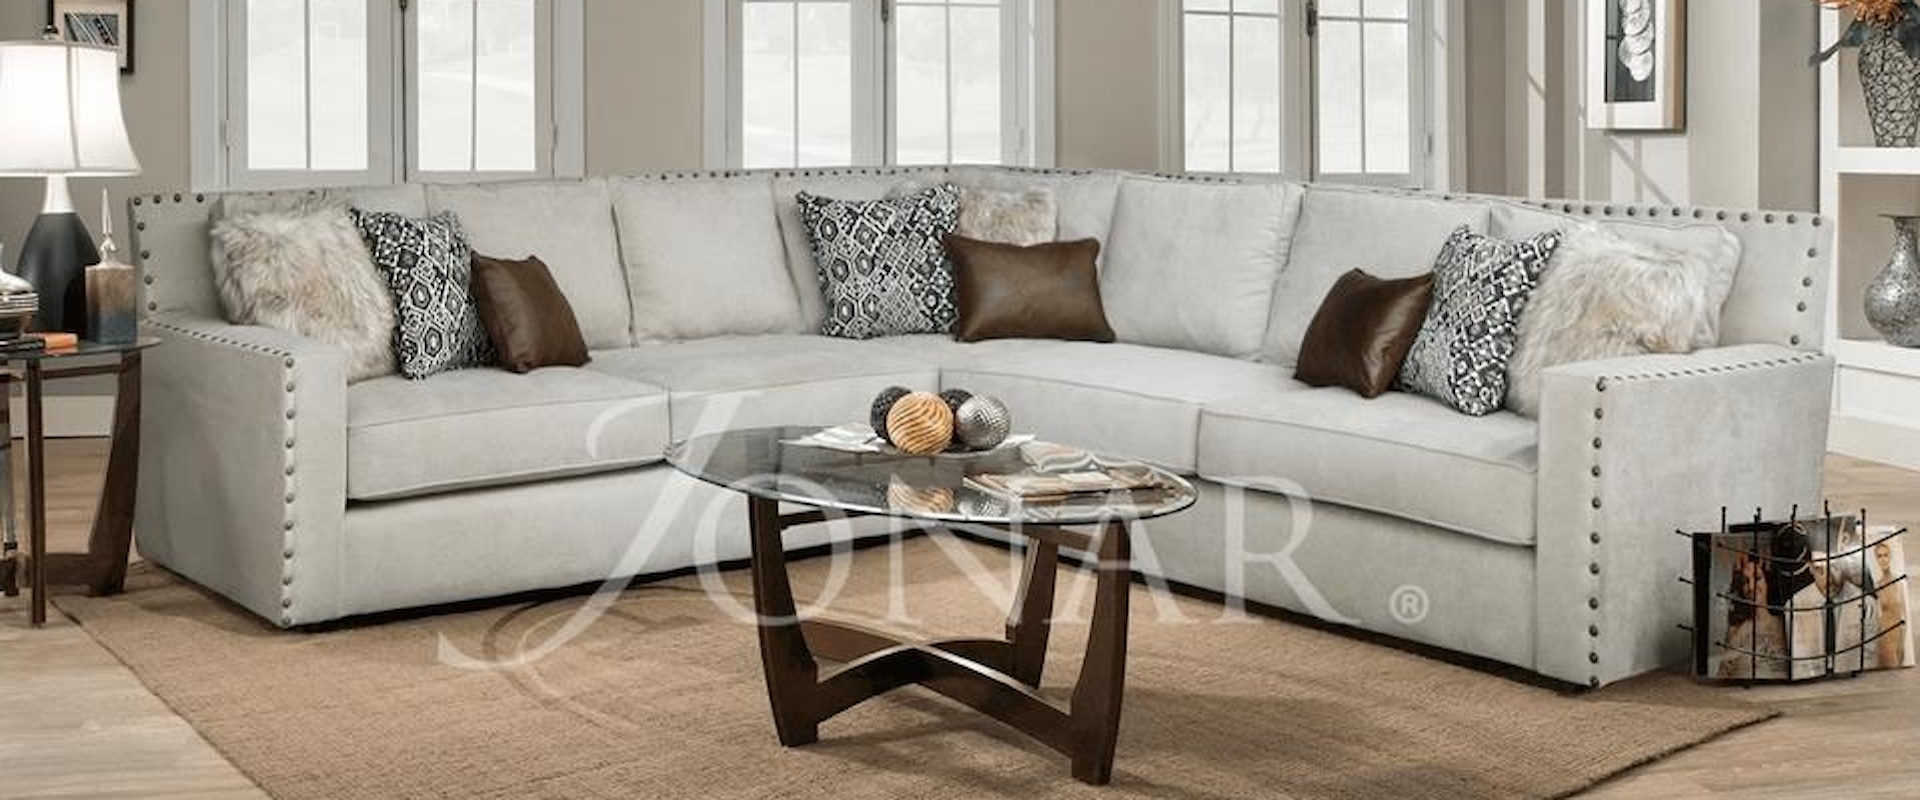 3 Piece Sectional Sofa and Upholstered Chair Set